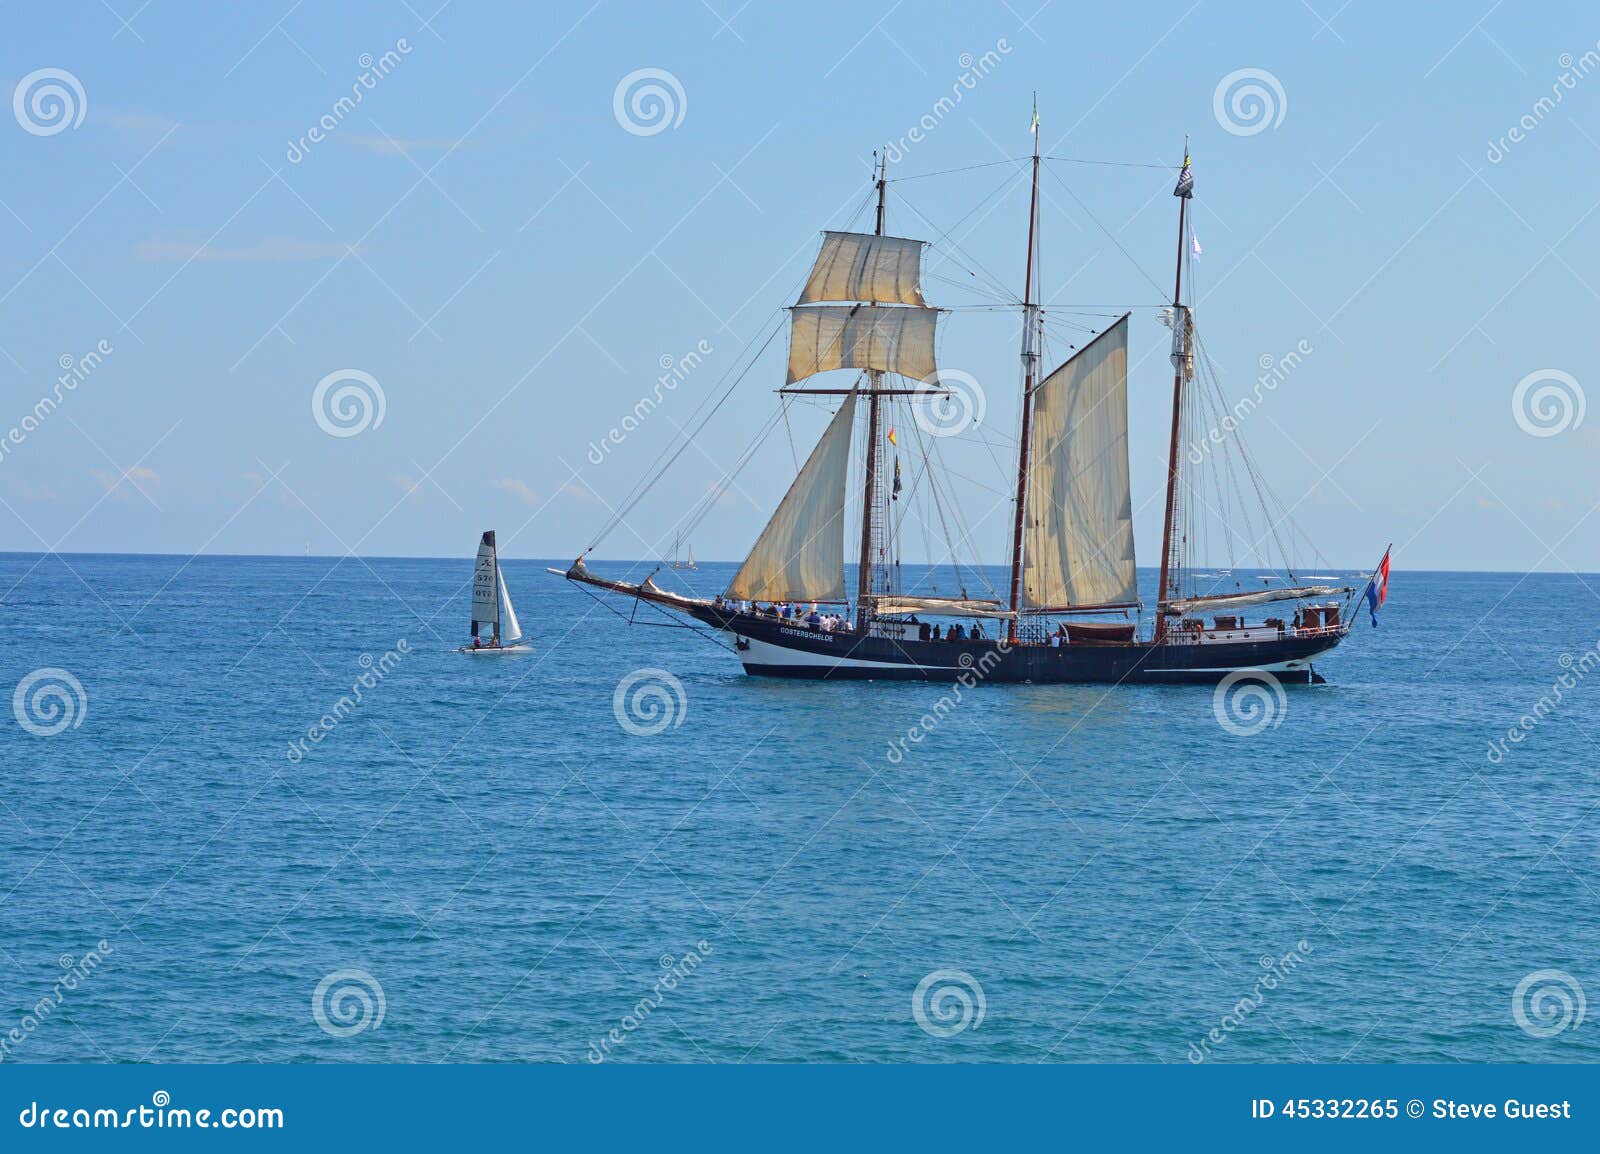 Sailing Boats Little And Large Editorial Image - Image ...